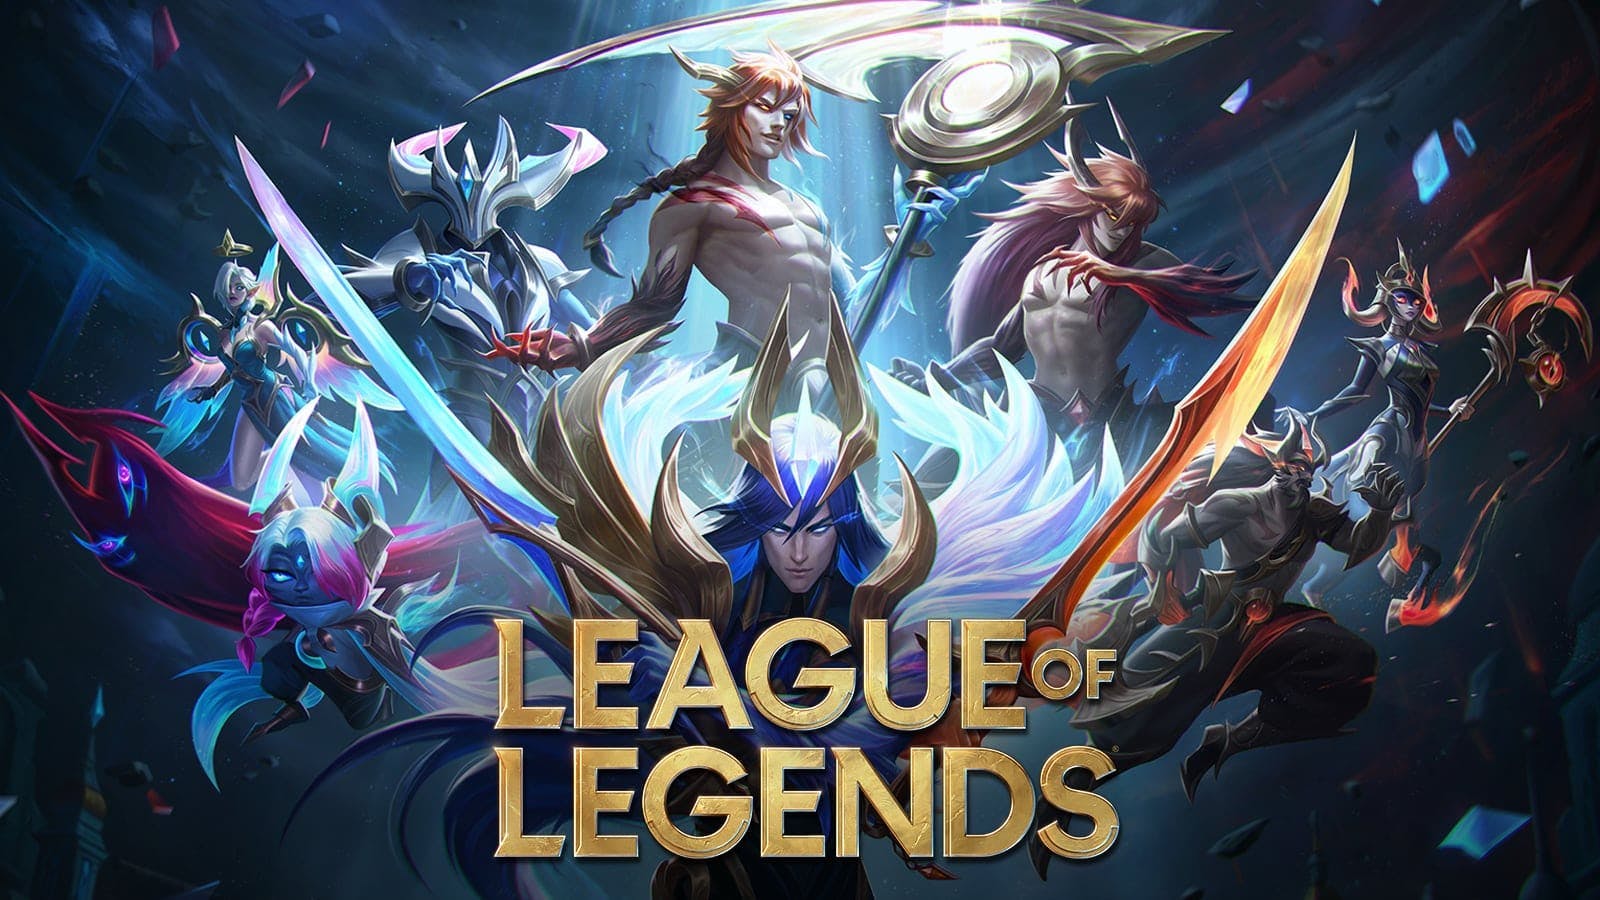 League of Legends will ‘change forever’ in 2025 - new Riot director writes